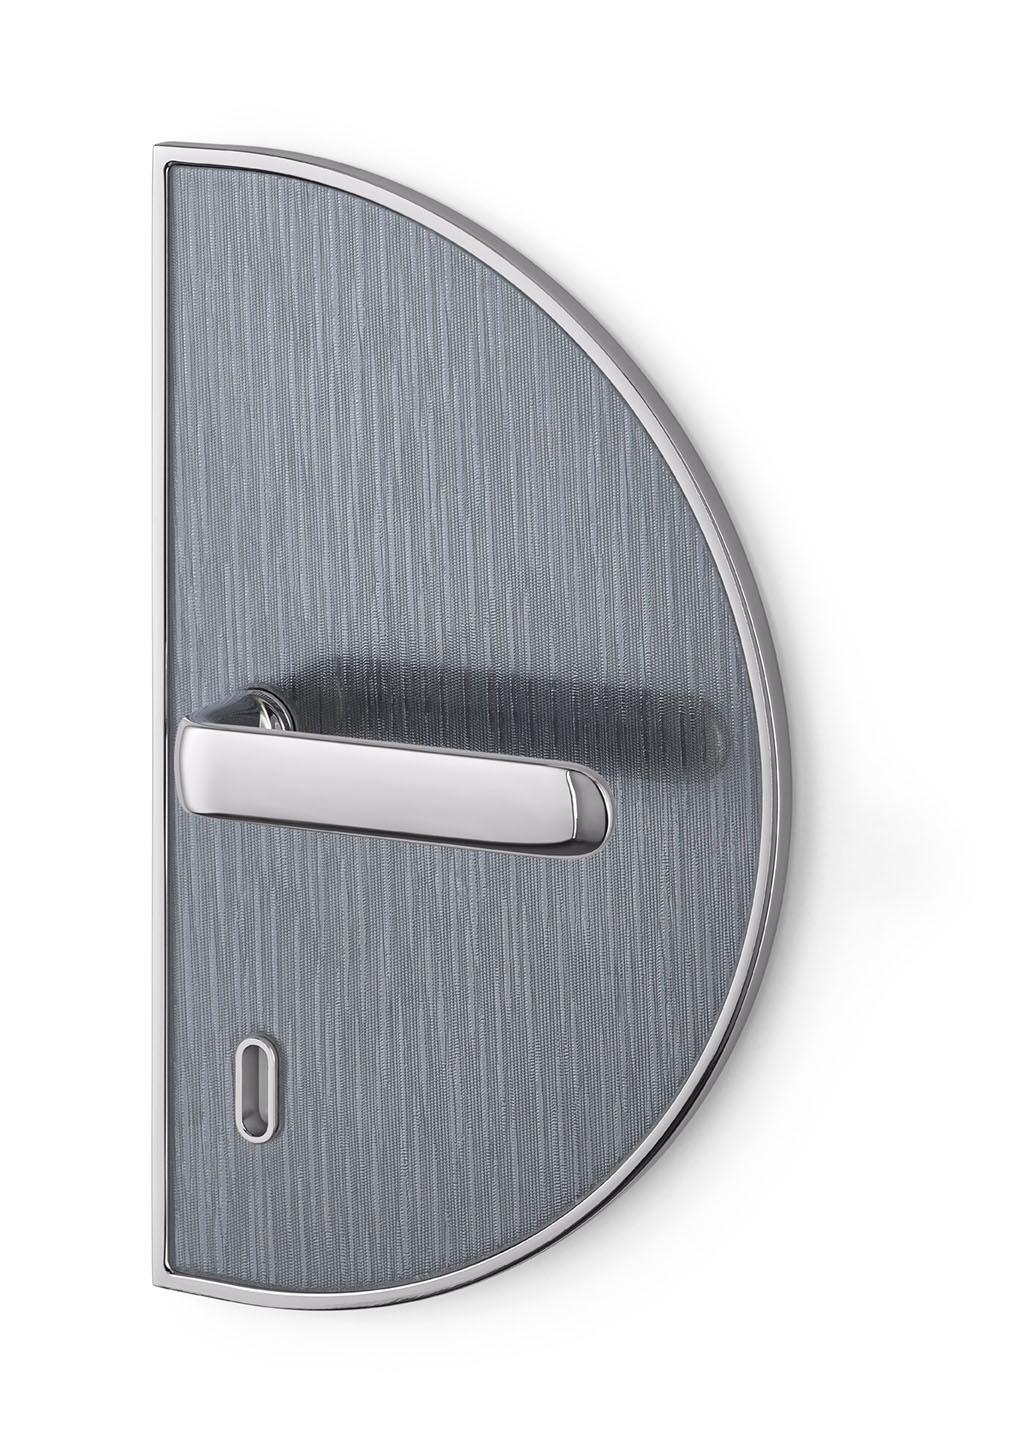 Door Handle Aluminum Plate Brass Handle Body Polished Chrome Finished Vetrite For Sale 3